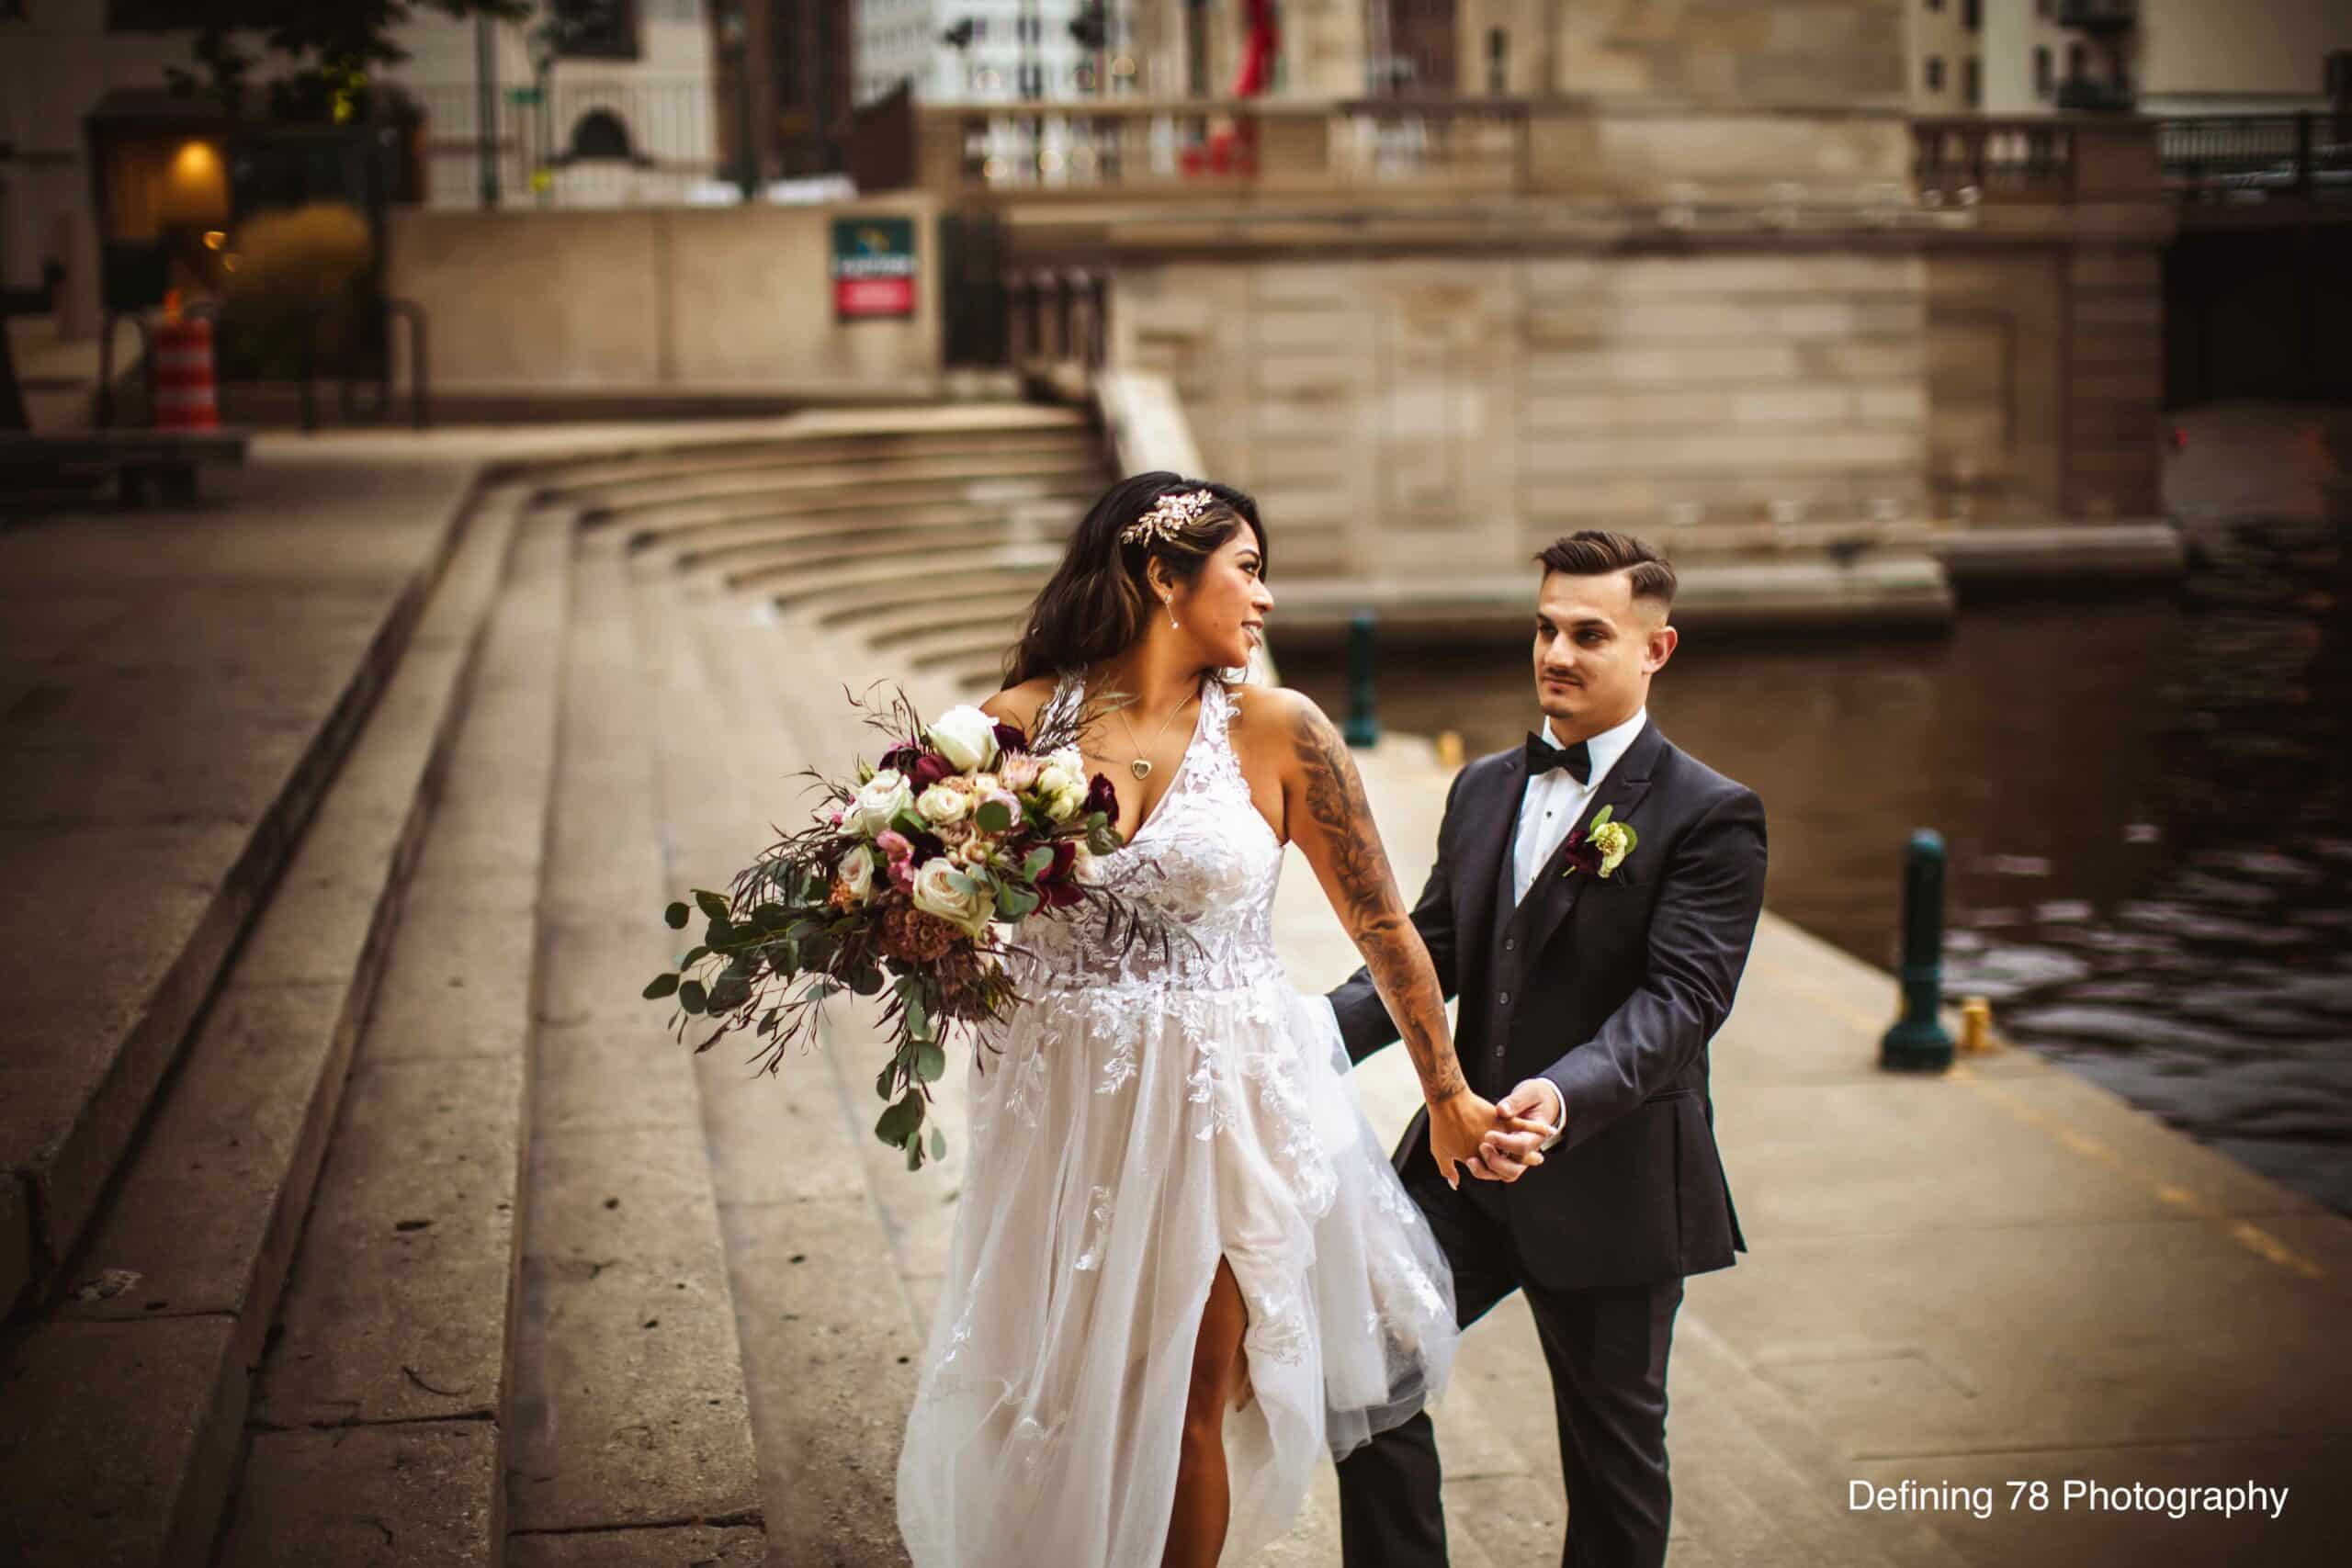 Wedding venue close to waterfront view on Milwaukee River